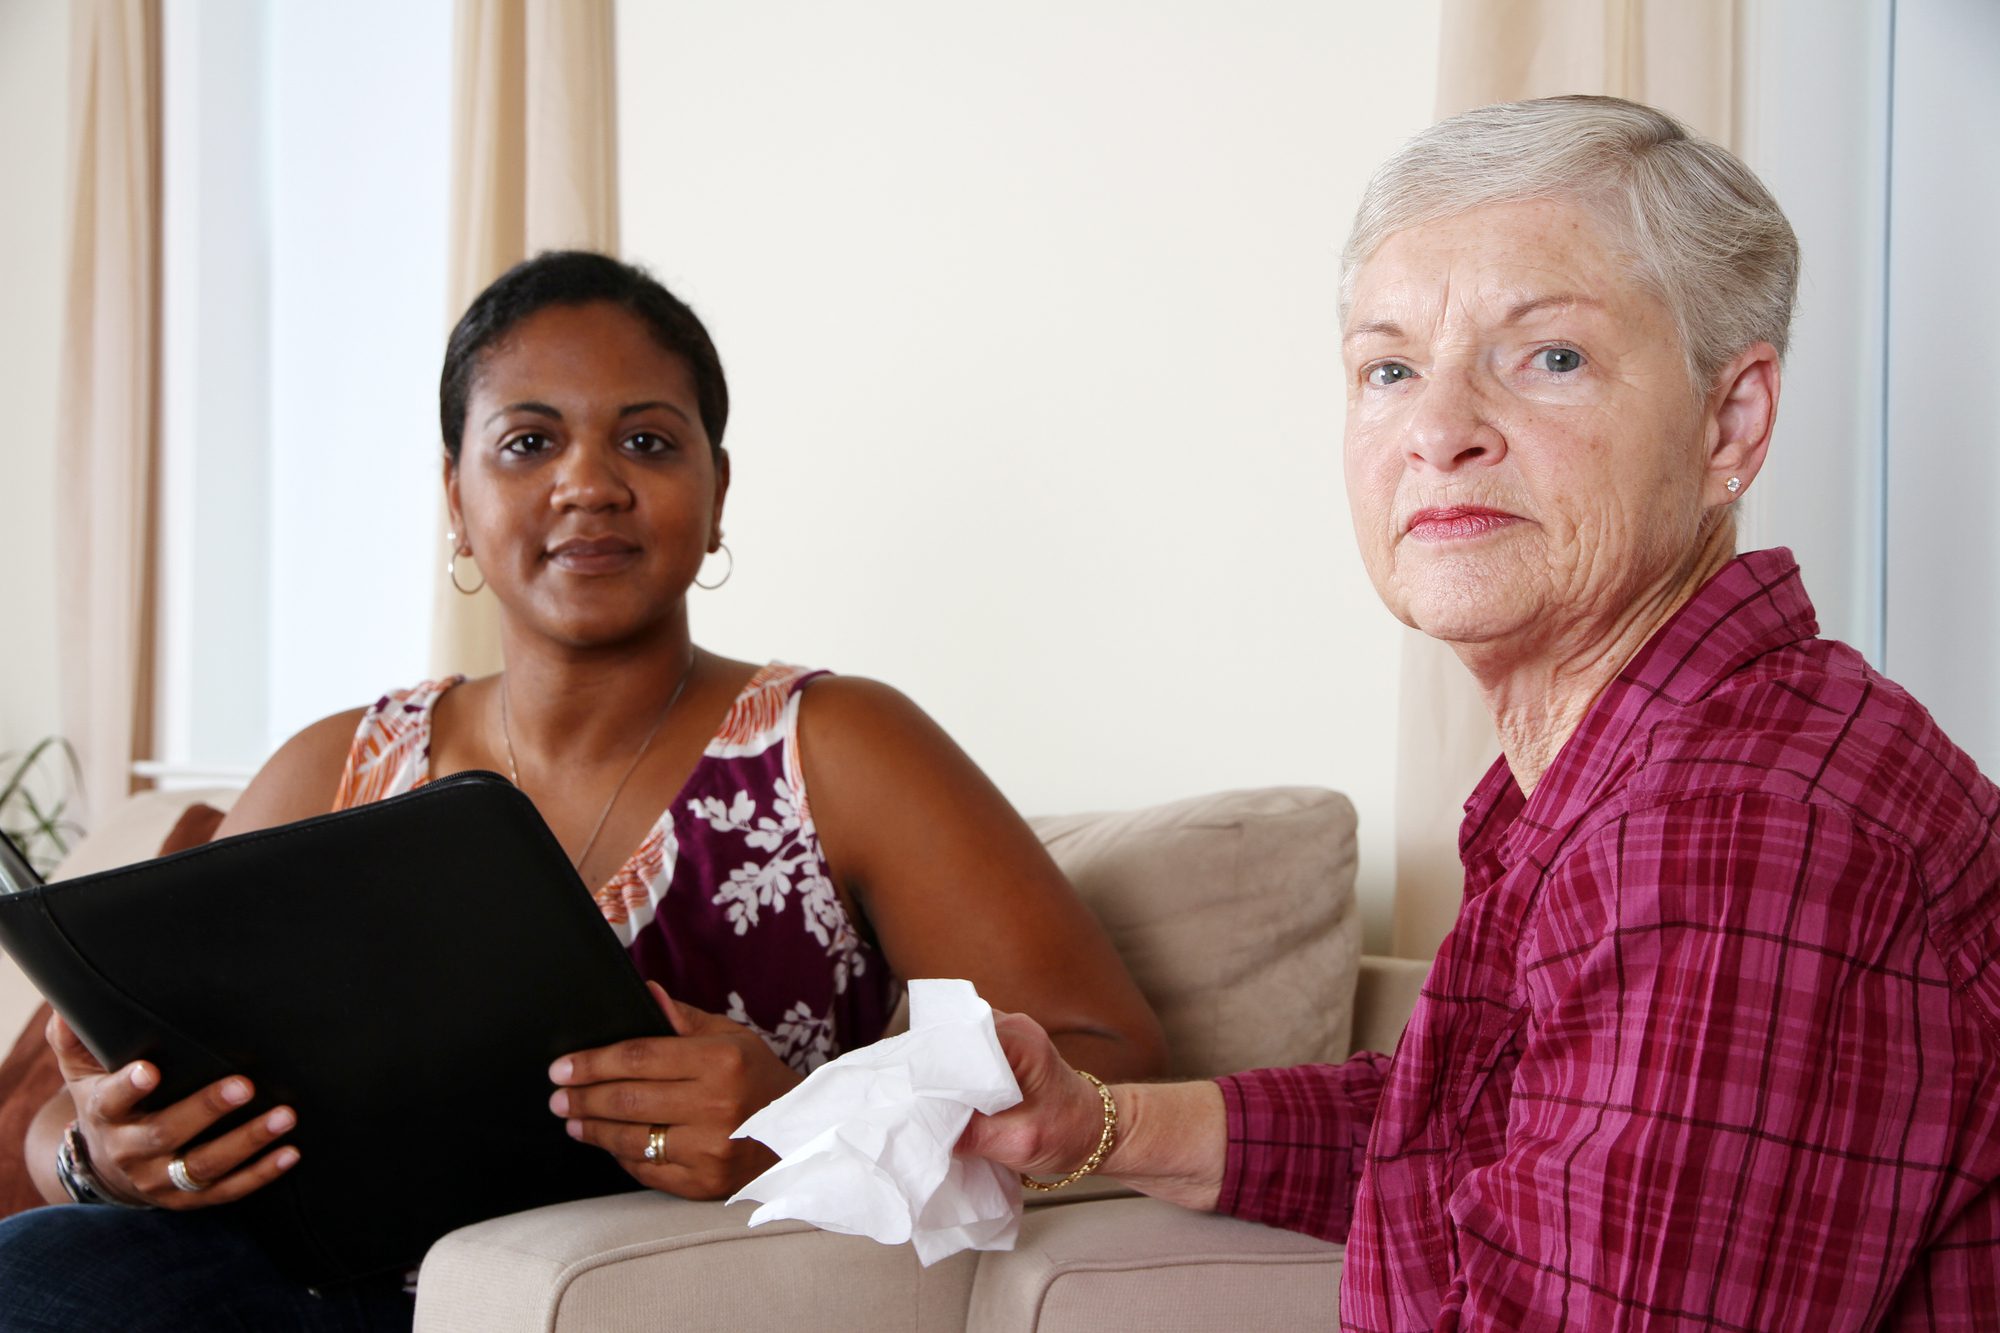 Mental Health Case Manager speaking to an elderly lady